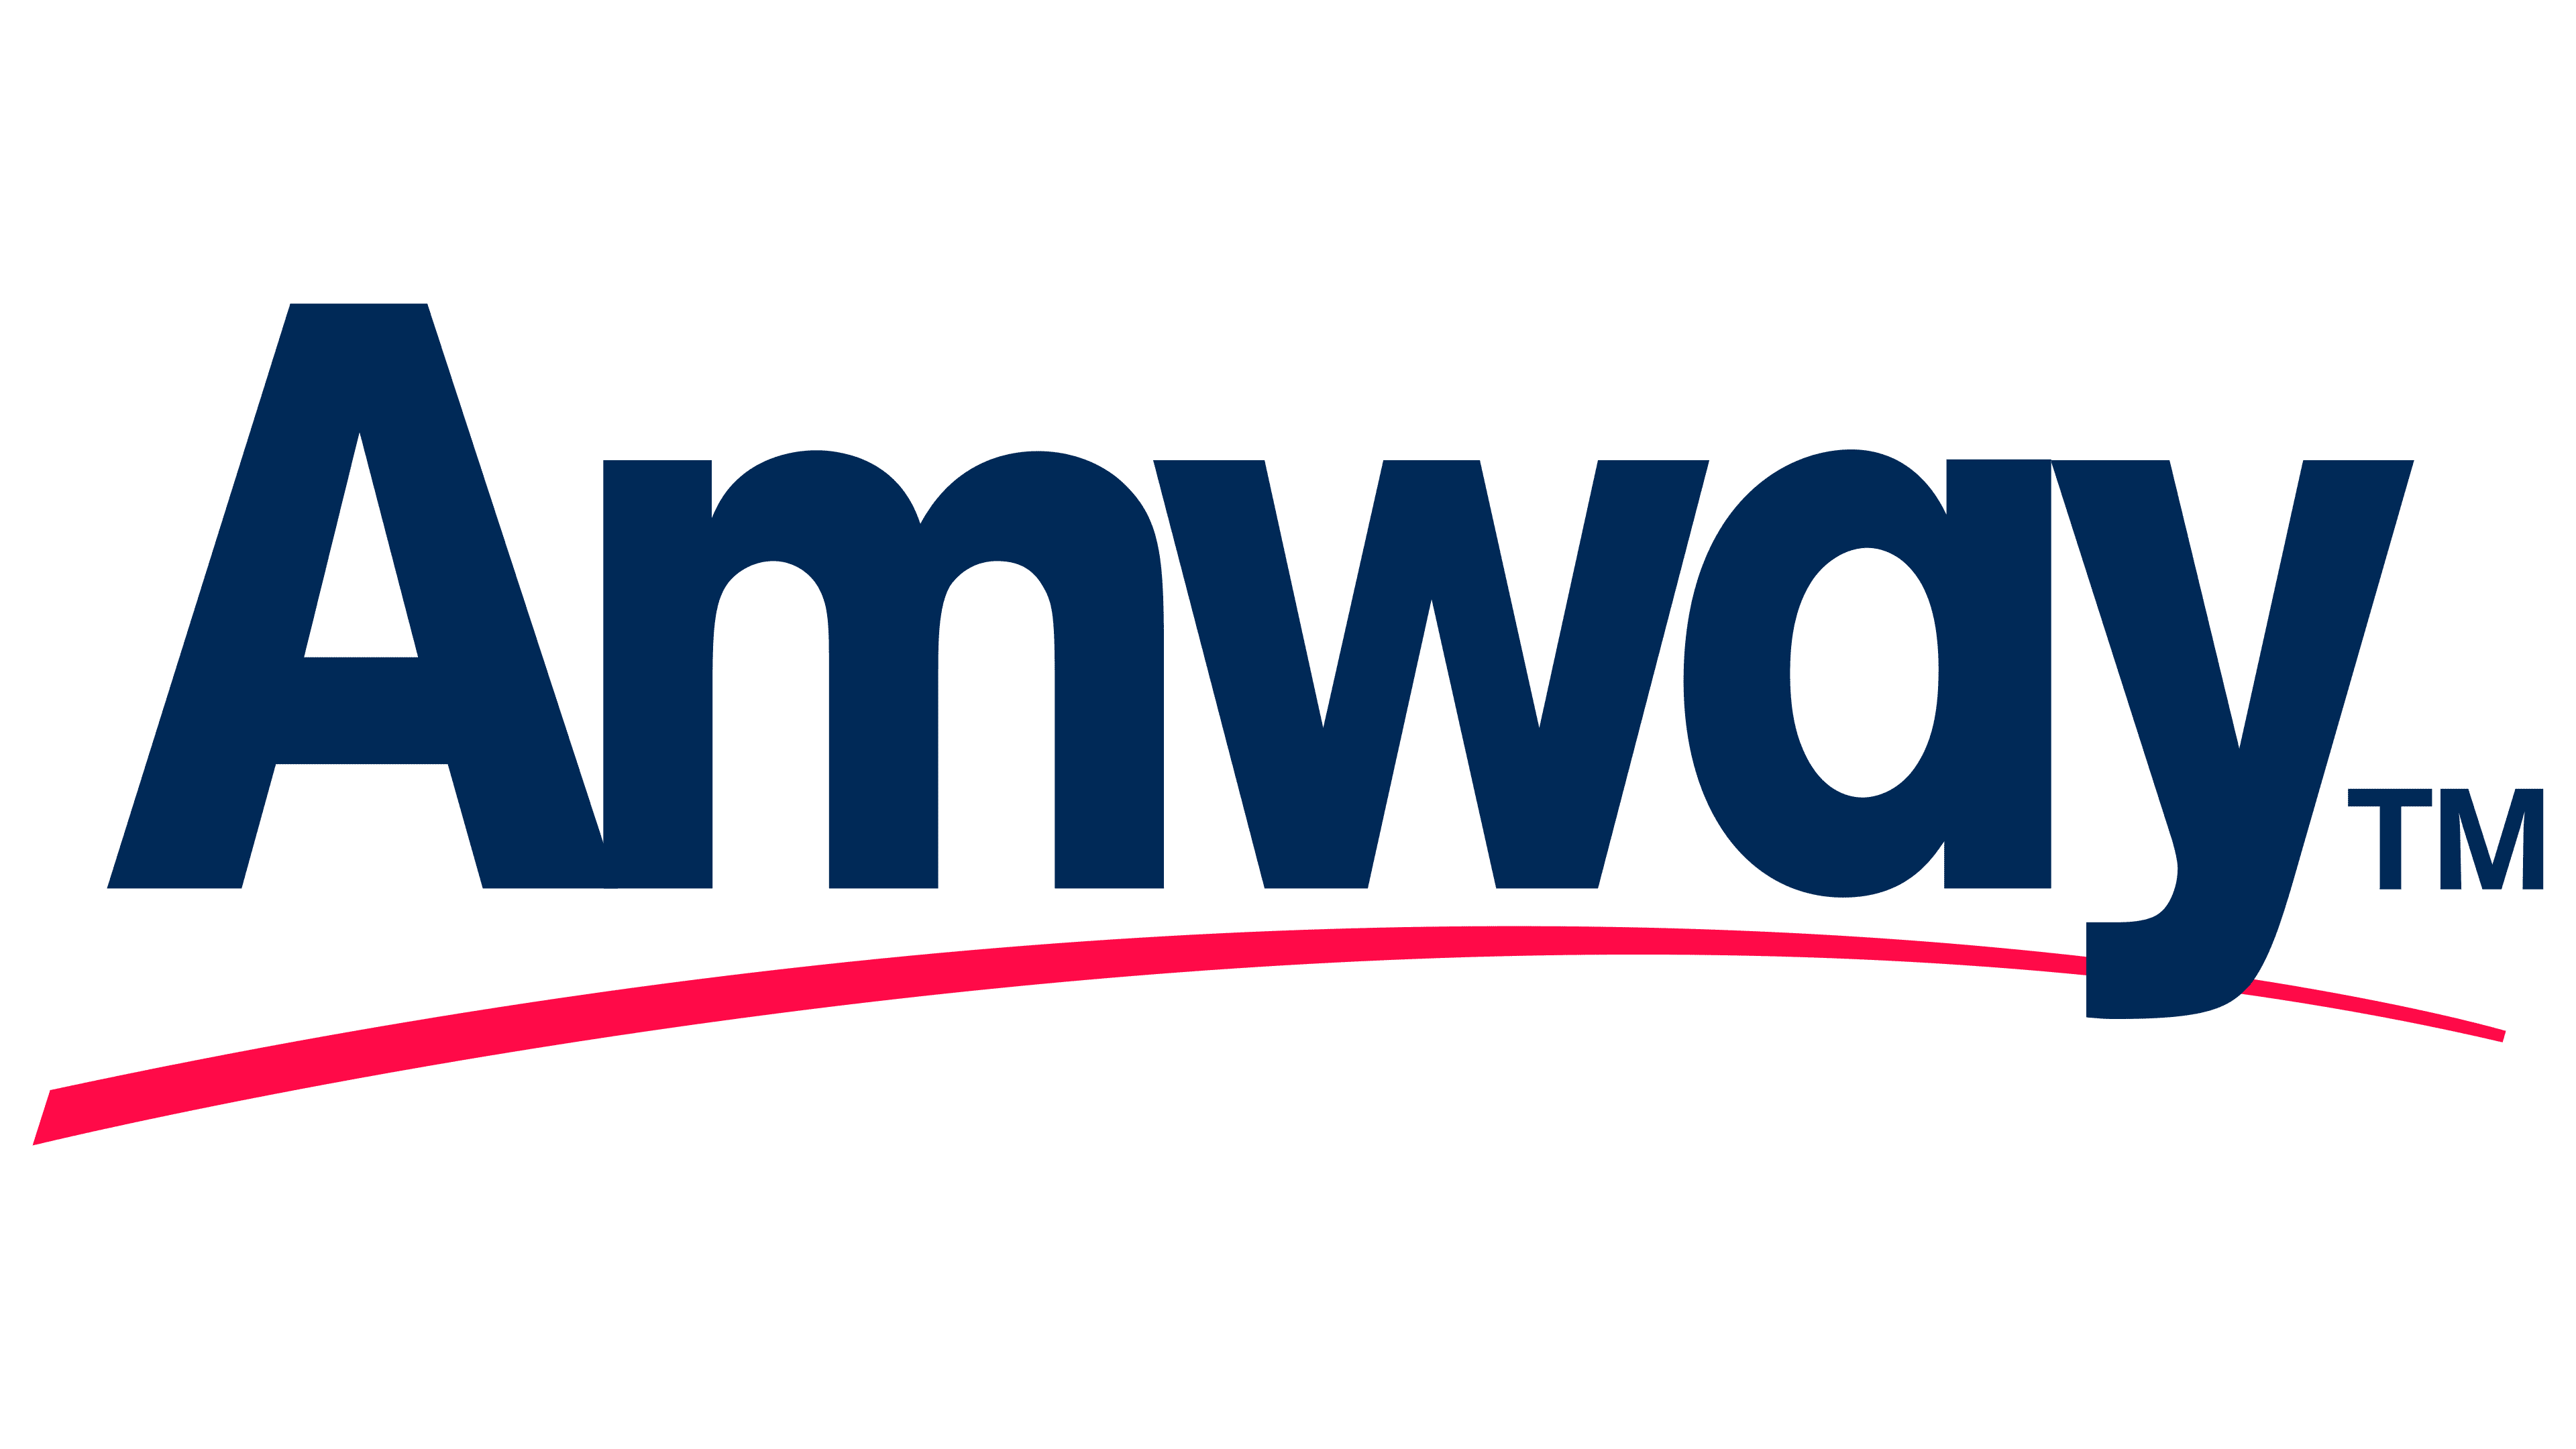 Why Should We Join Amway As A Carrier